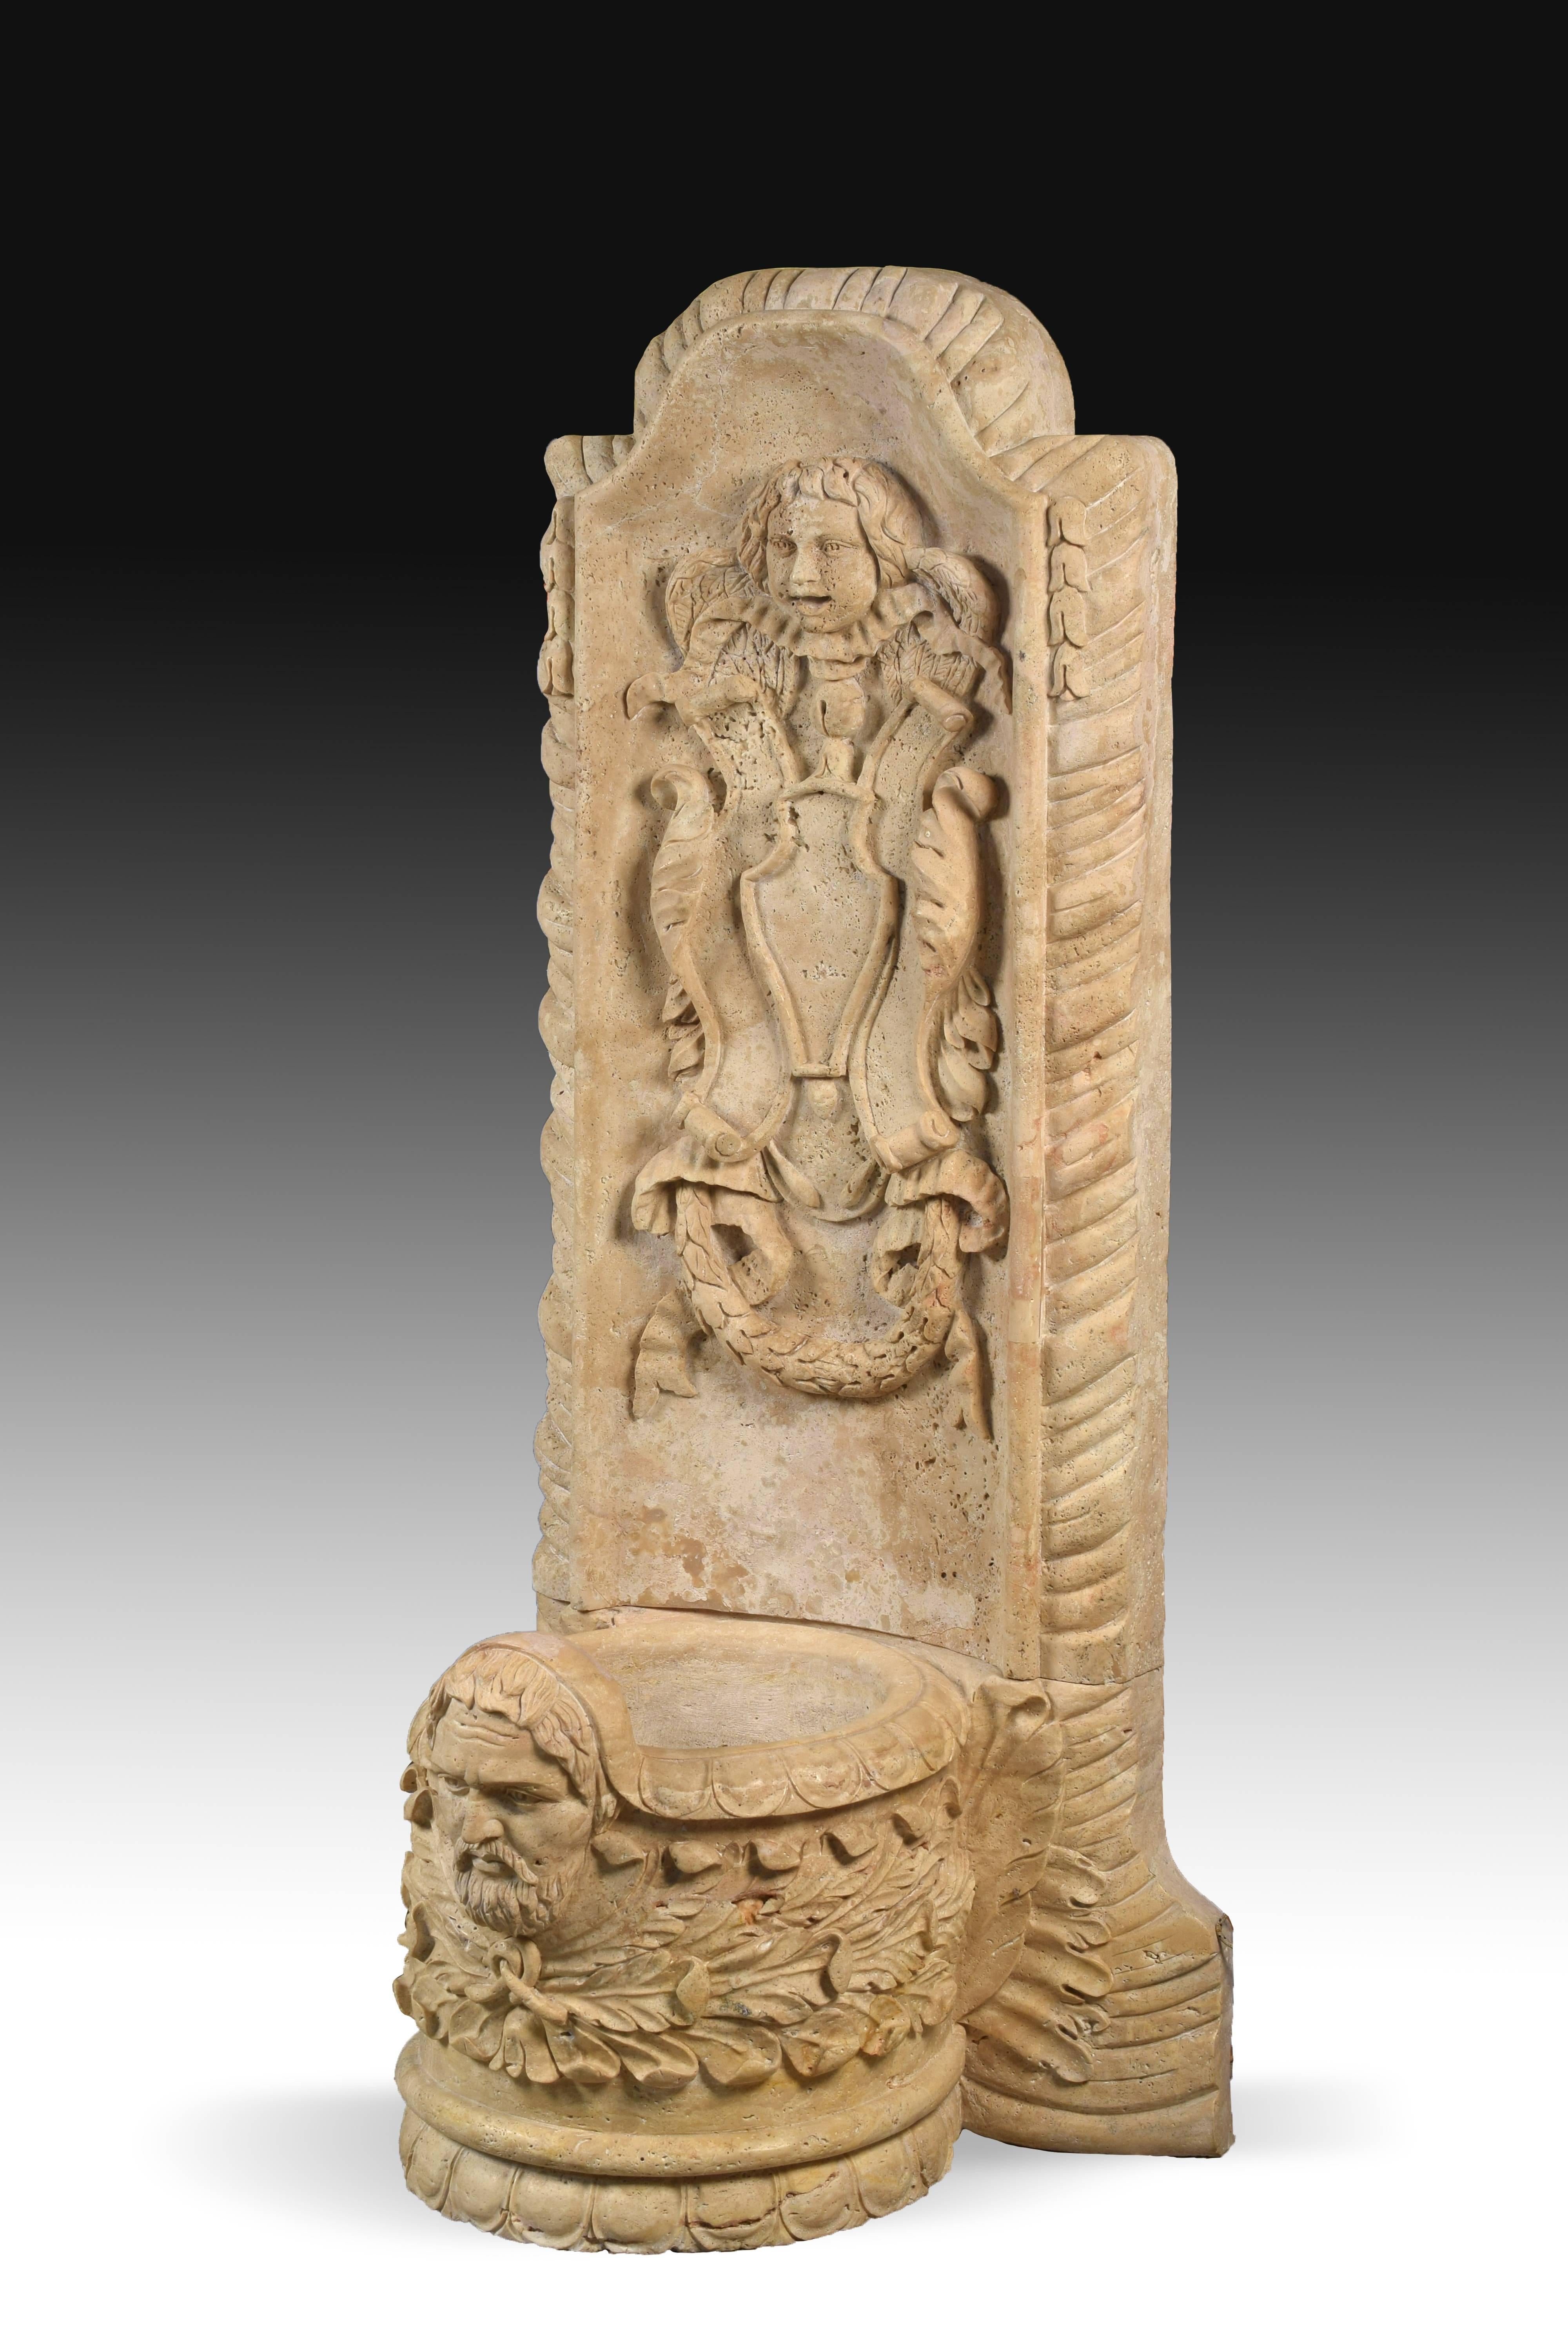 Fountain made in carved travertine with low cup, decorated with a bust and vegetal elements and a high panel to fix it to the wall, also decorated with high relief carvings of classicist influence. Although the elements show the influence of models